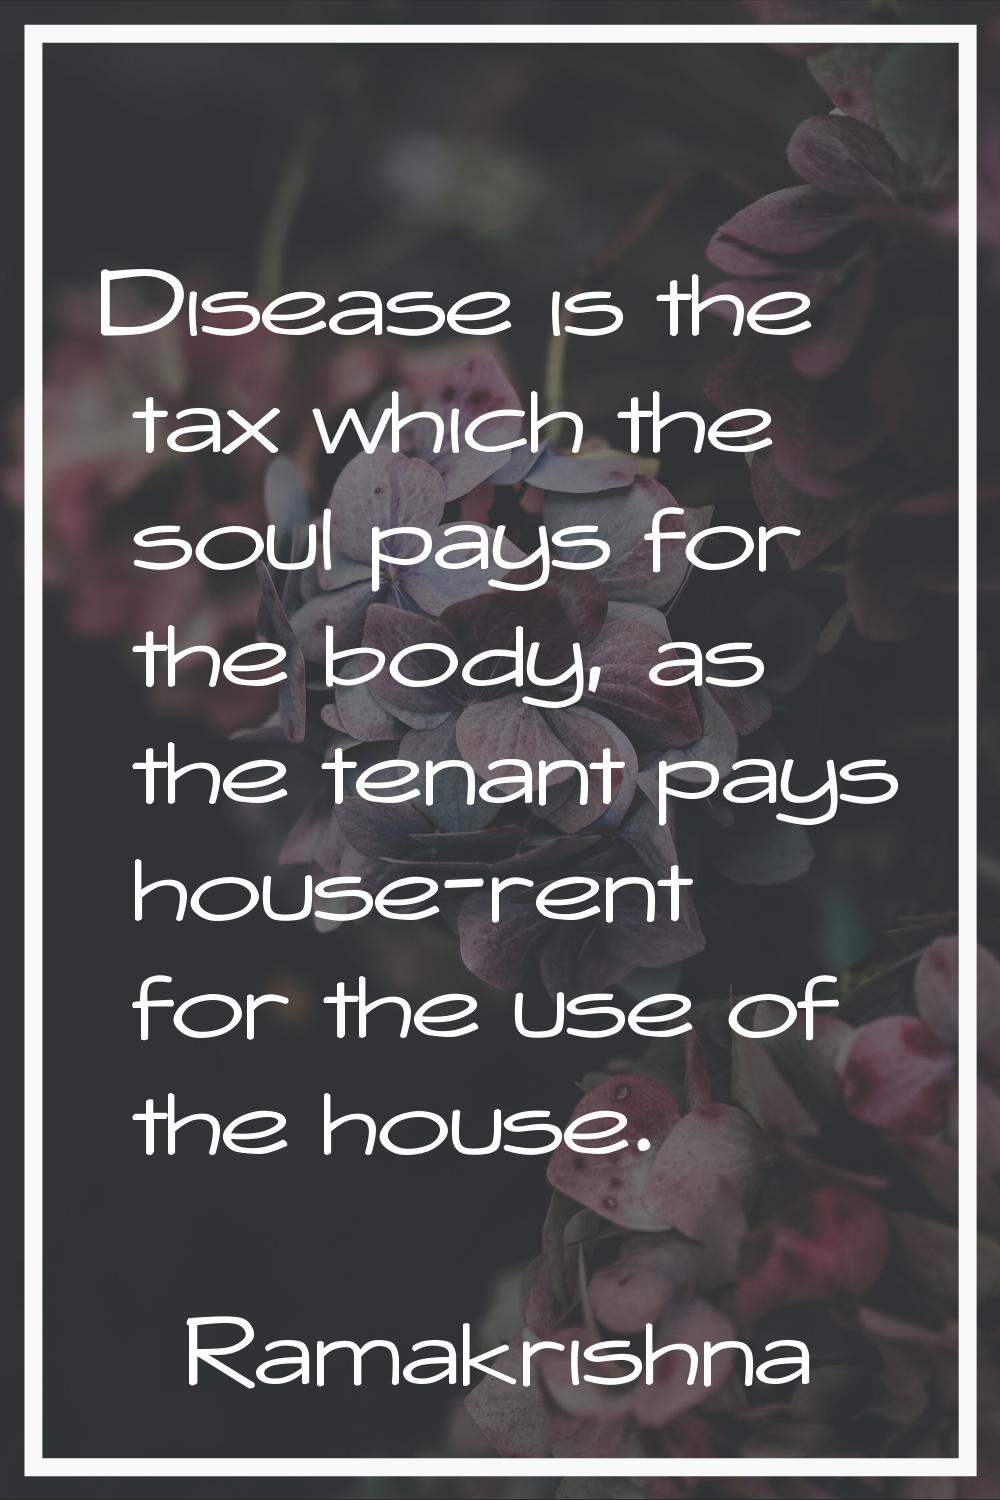 Disease is the tax which the soul pays for the body, as the tenant pays house-rent for the use of t